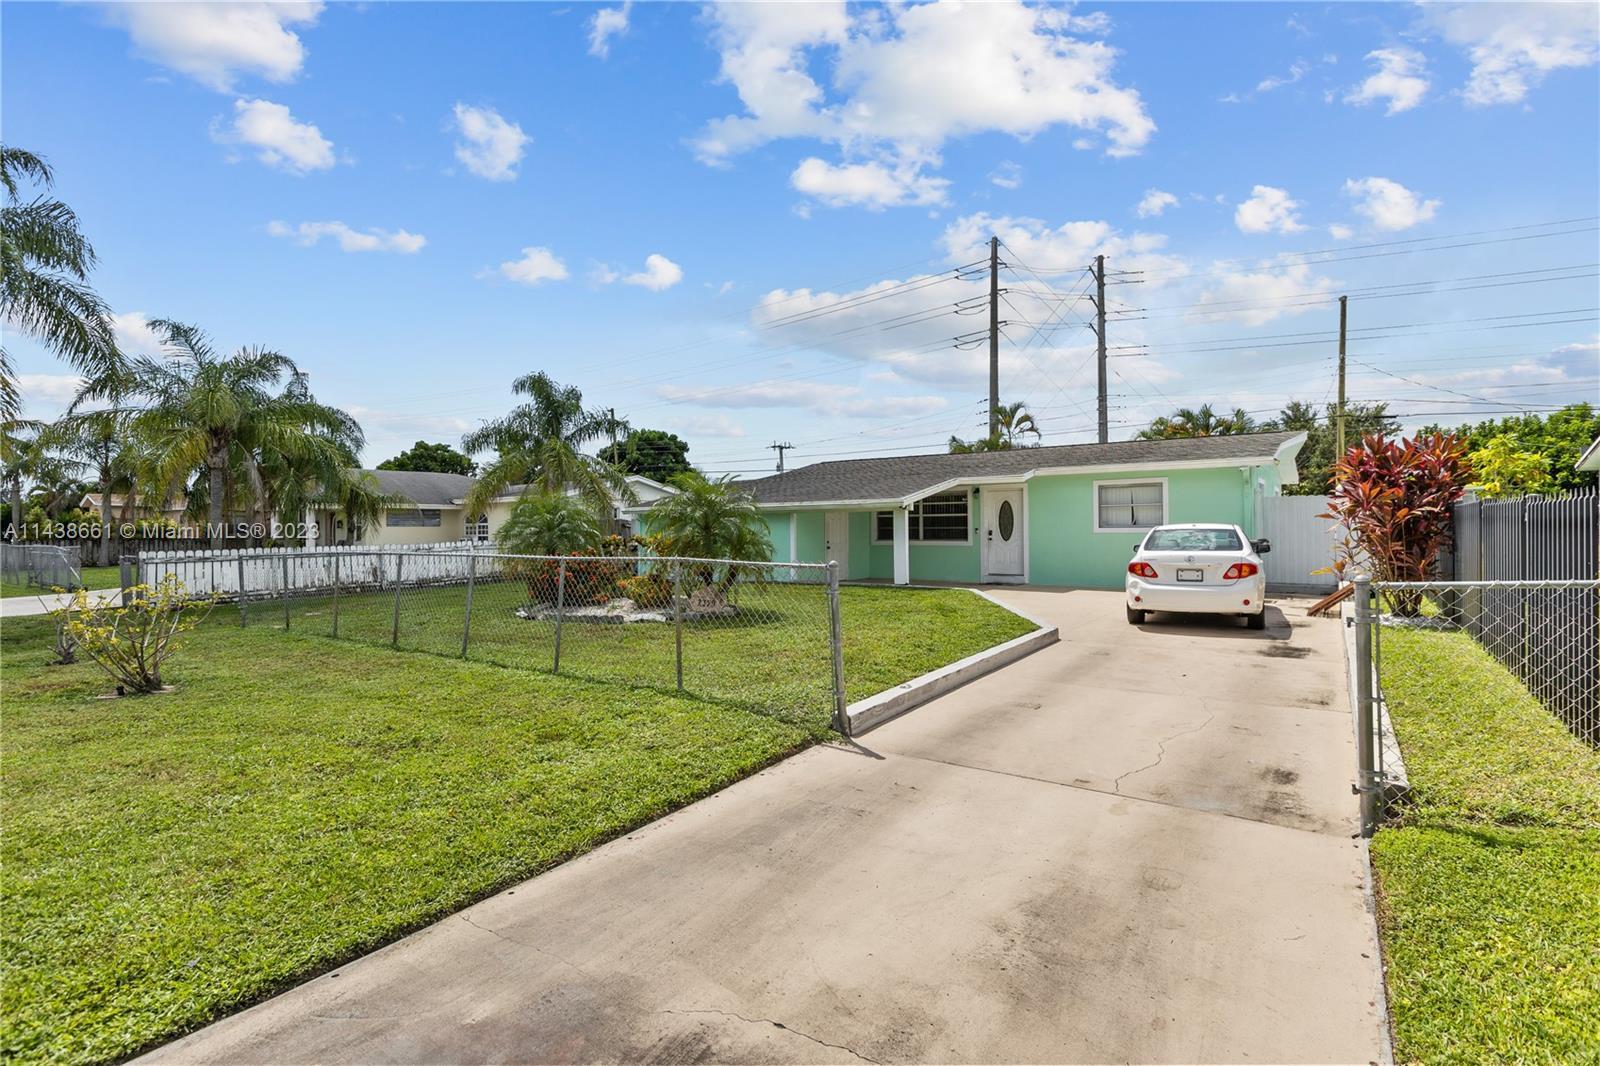 Amazing location, location, location! This home will allow you Enjoy the perks of Florida living! ju